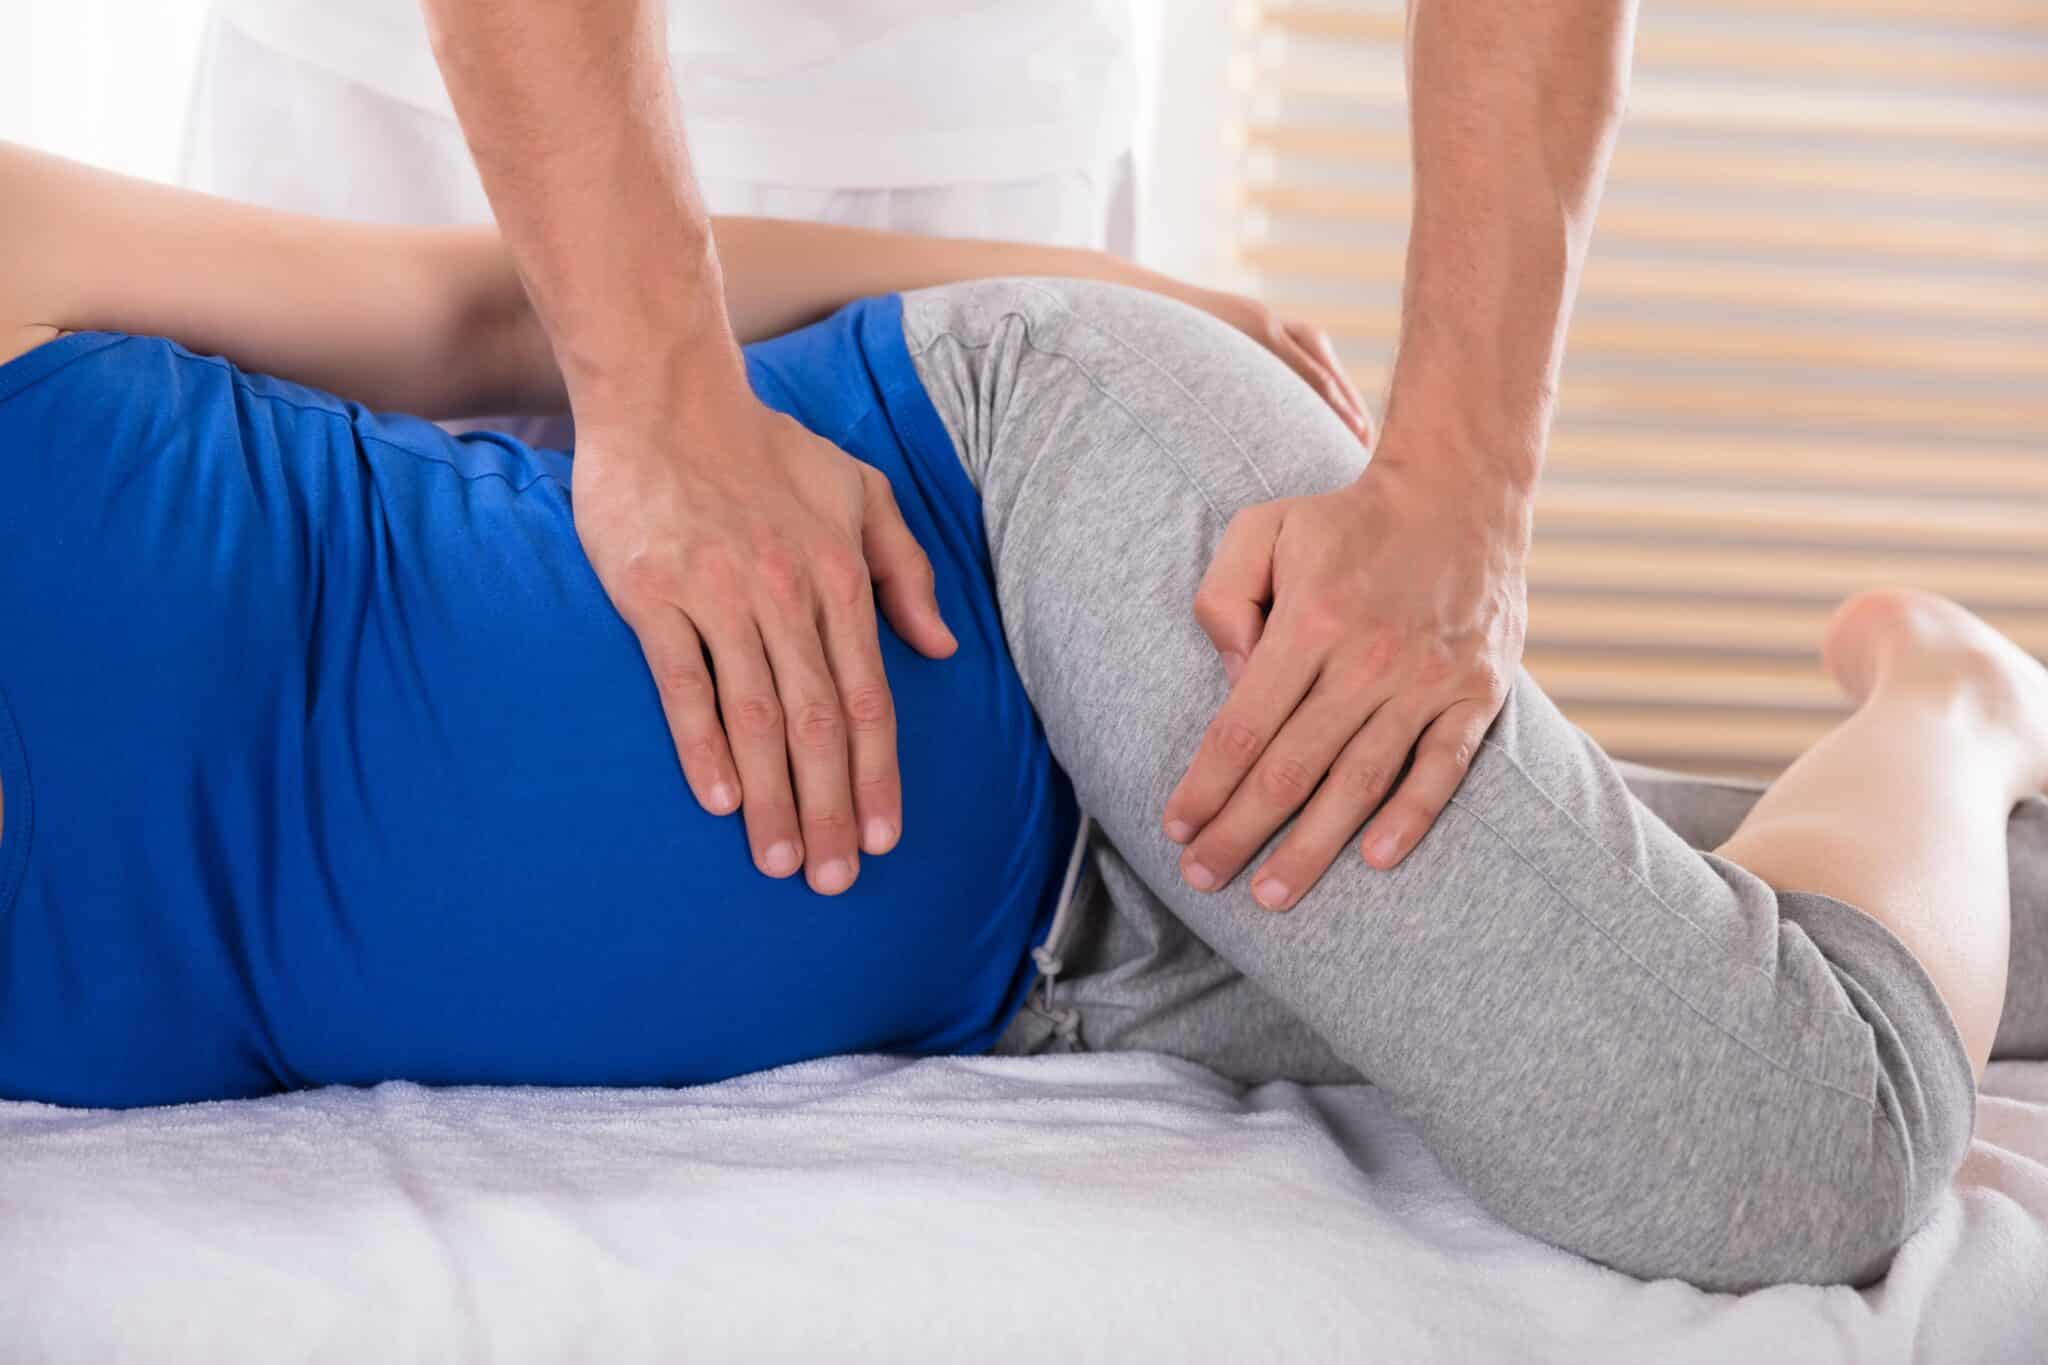 Chiropractic Adjustment for Low Back Pain Relief, Psoas Chiro Demonstration  